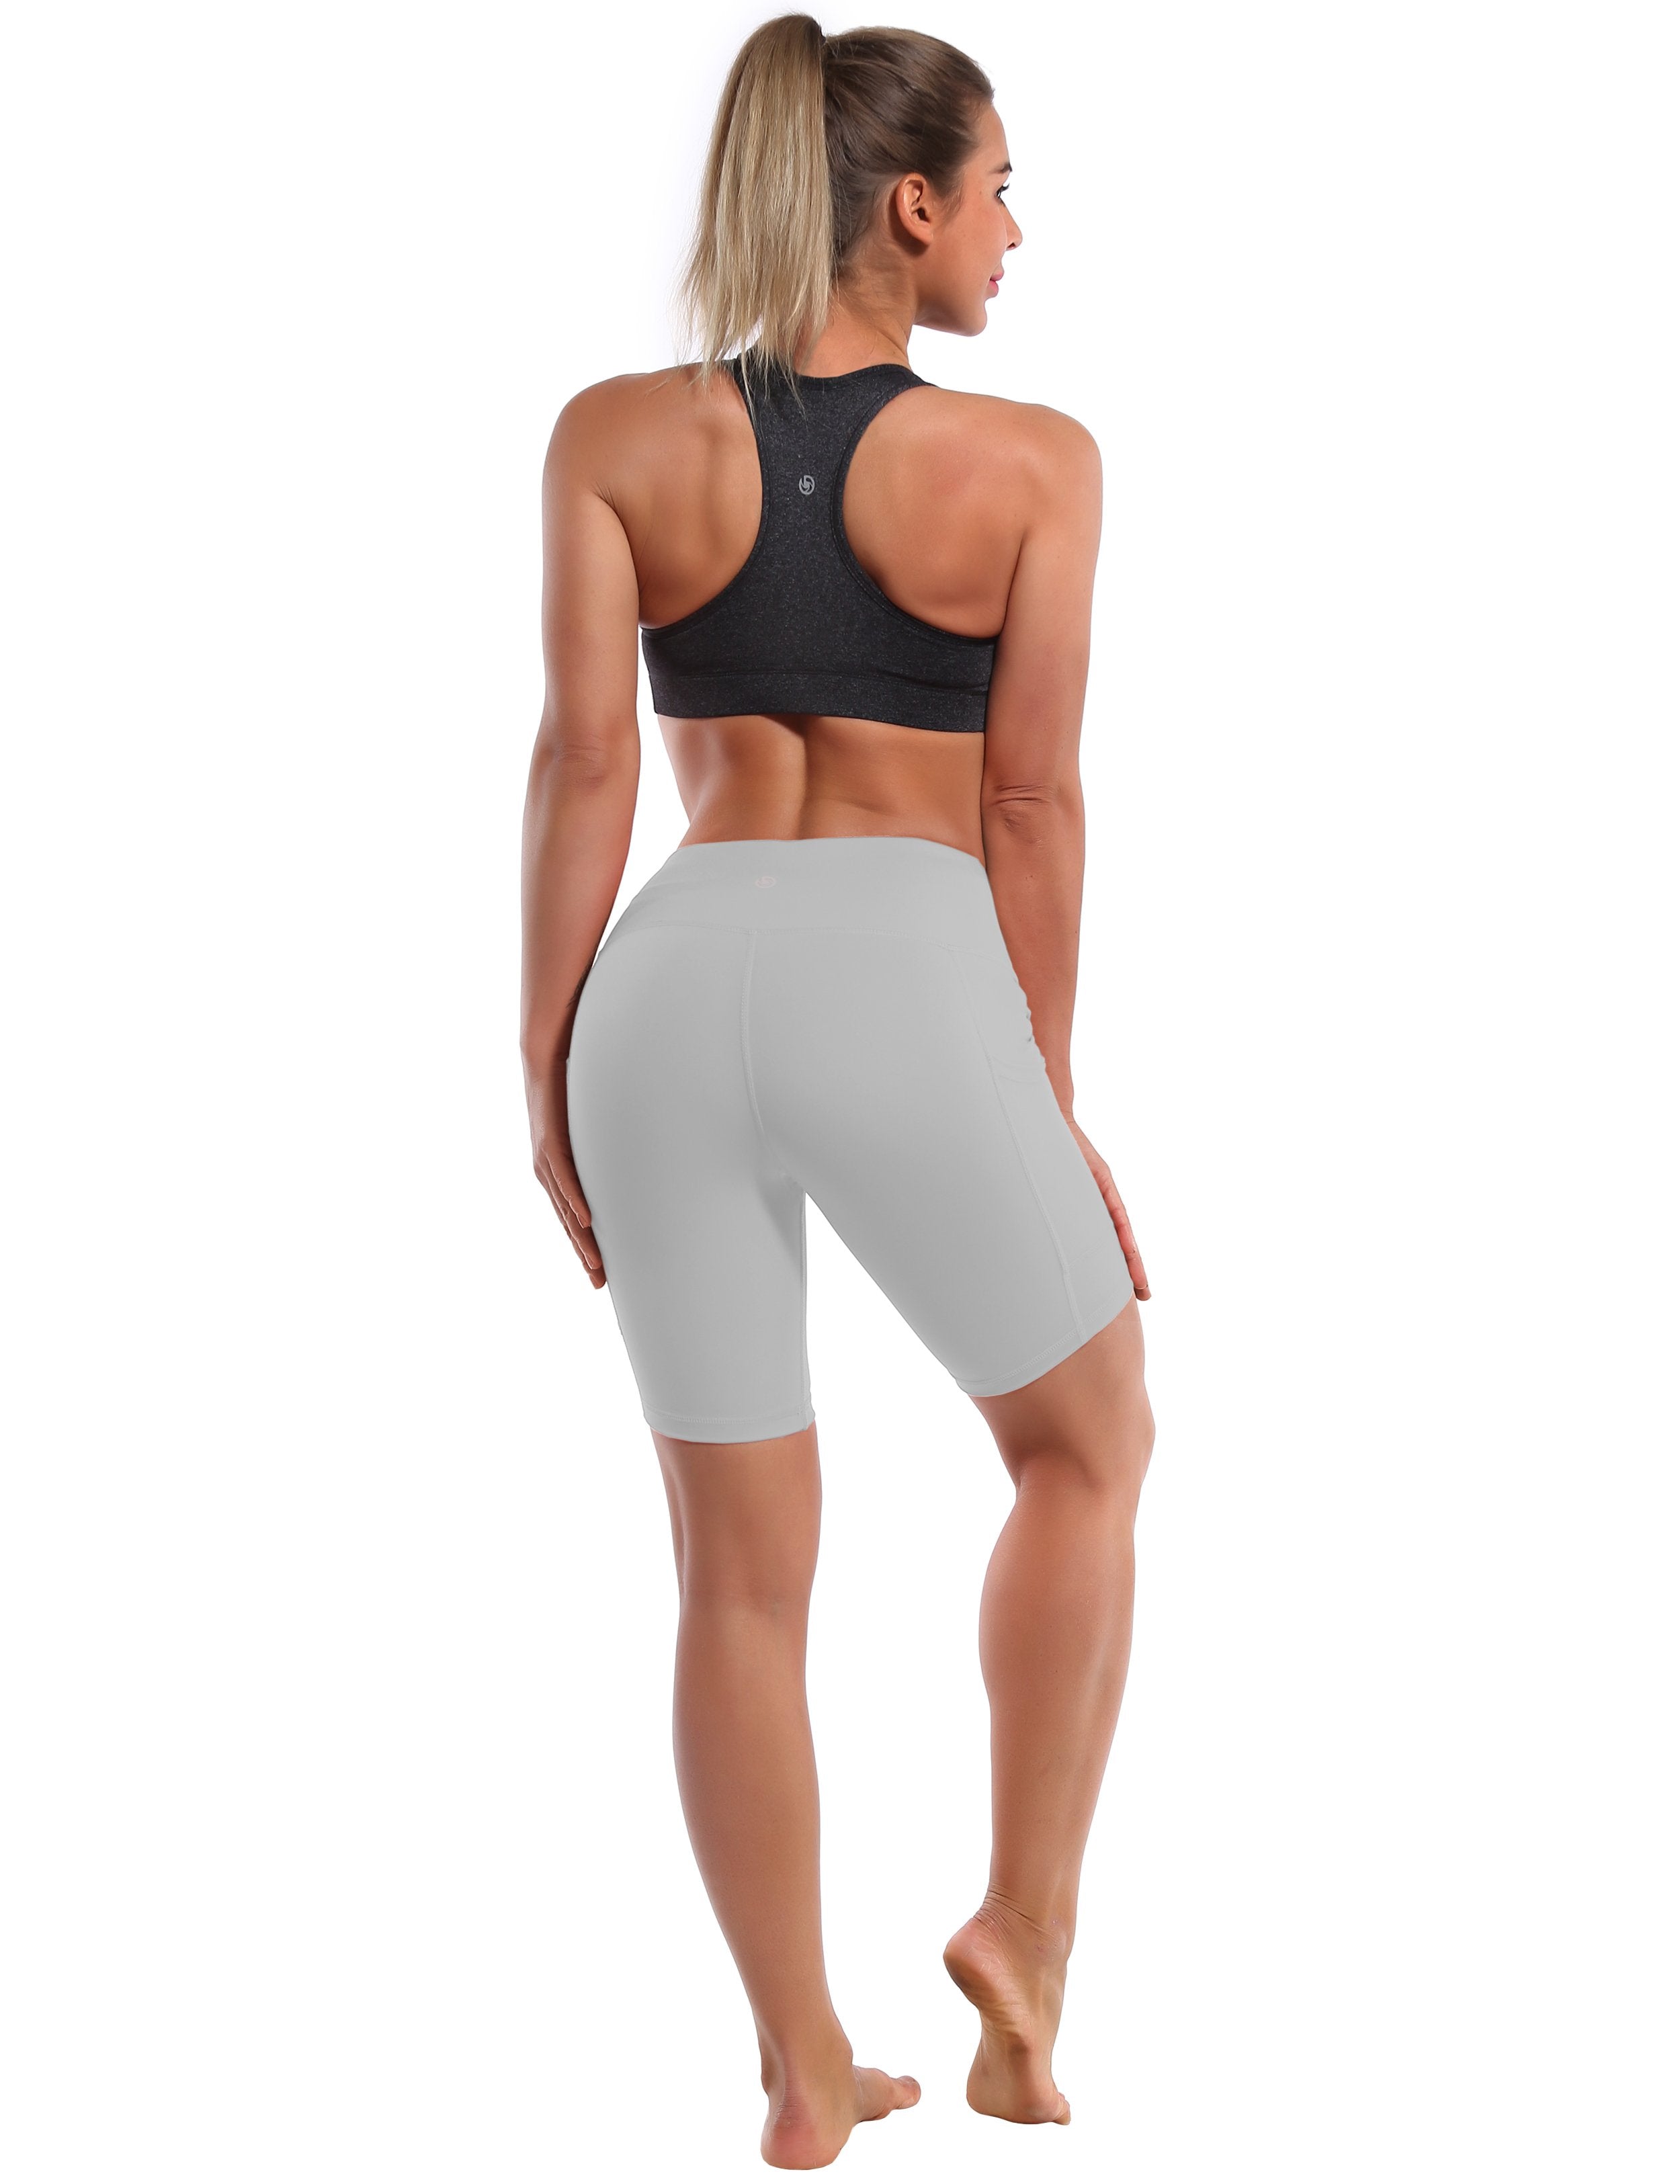 8" Side Pockets Jogging Shorts lightgray Sleek, soft, smooth and totally comfortable: our newest style is here. Softest-ever fabric High elasticity High density 4-way stretch Fabric doesn't attract lint easily No see-through Moisture-wicking Machine wash 75% Nylon, 25% Spandex